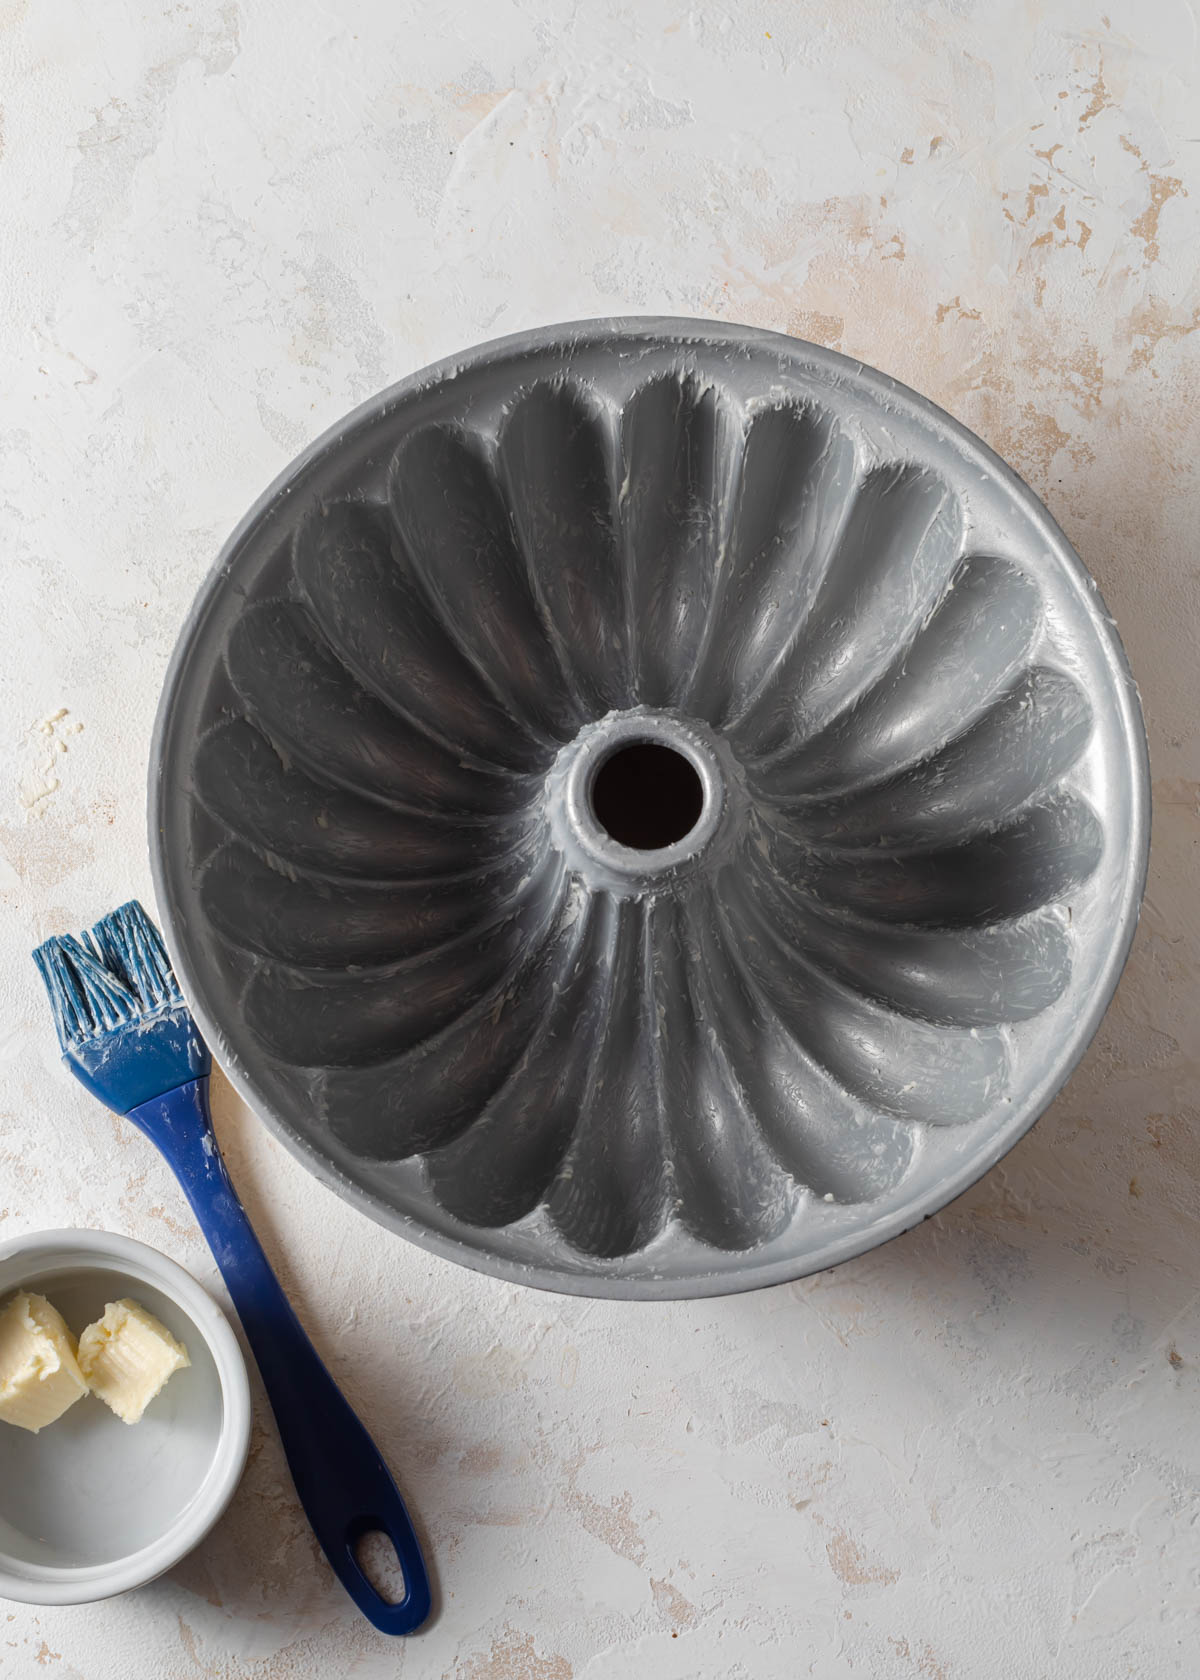 Bundt pan with butter smeared inside